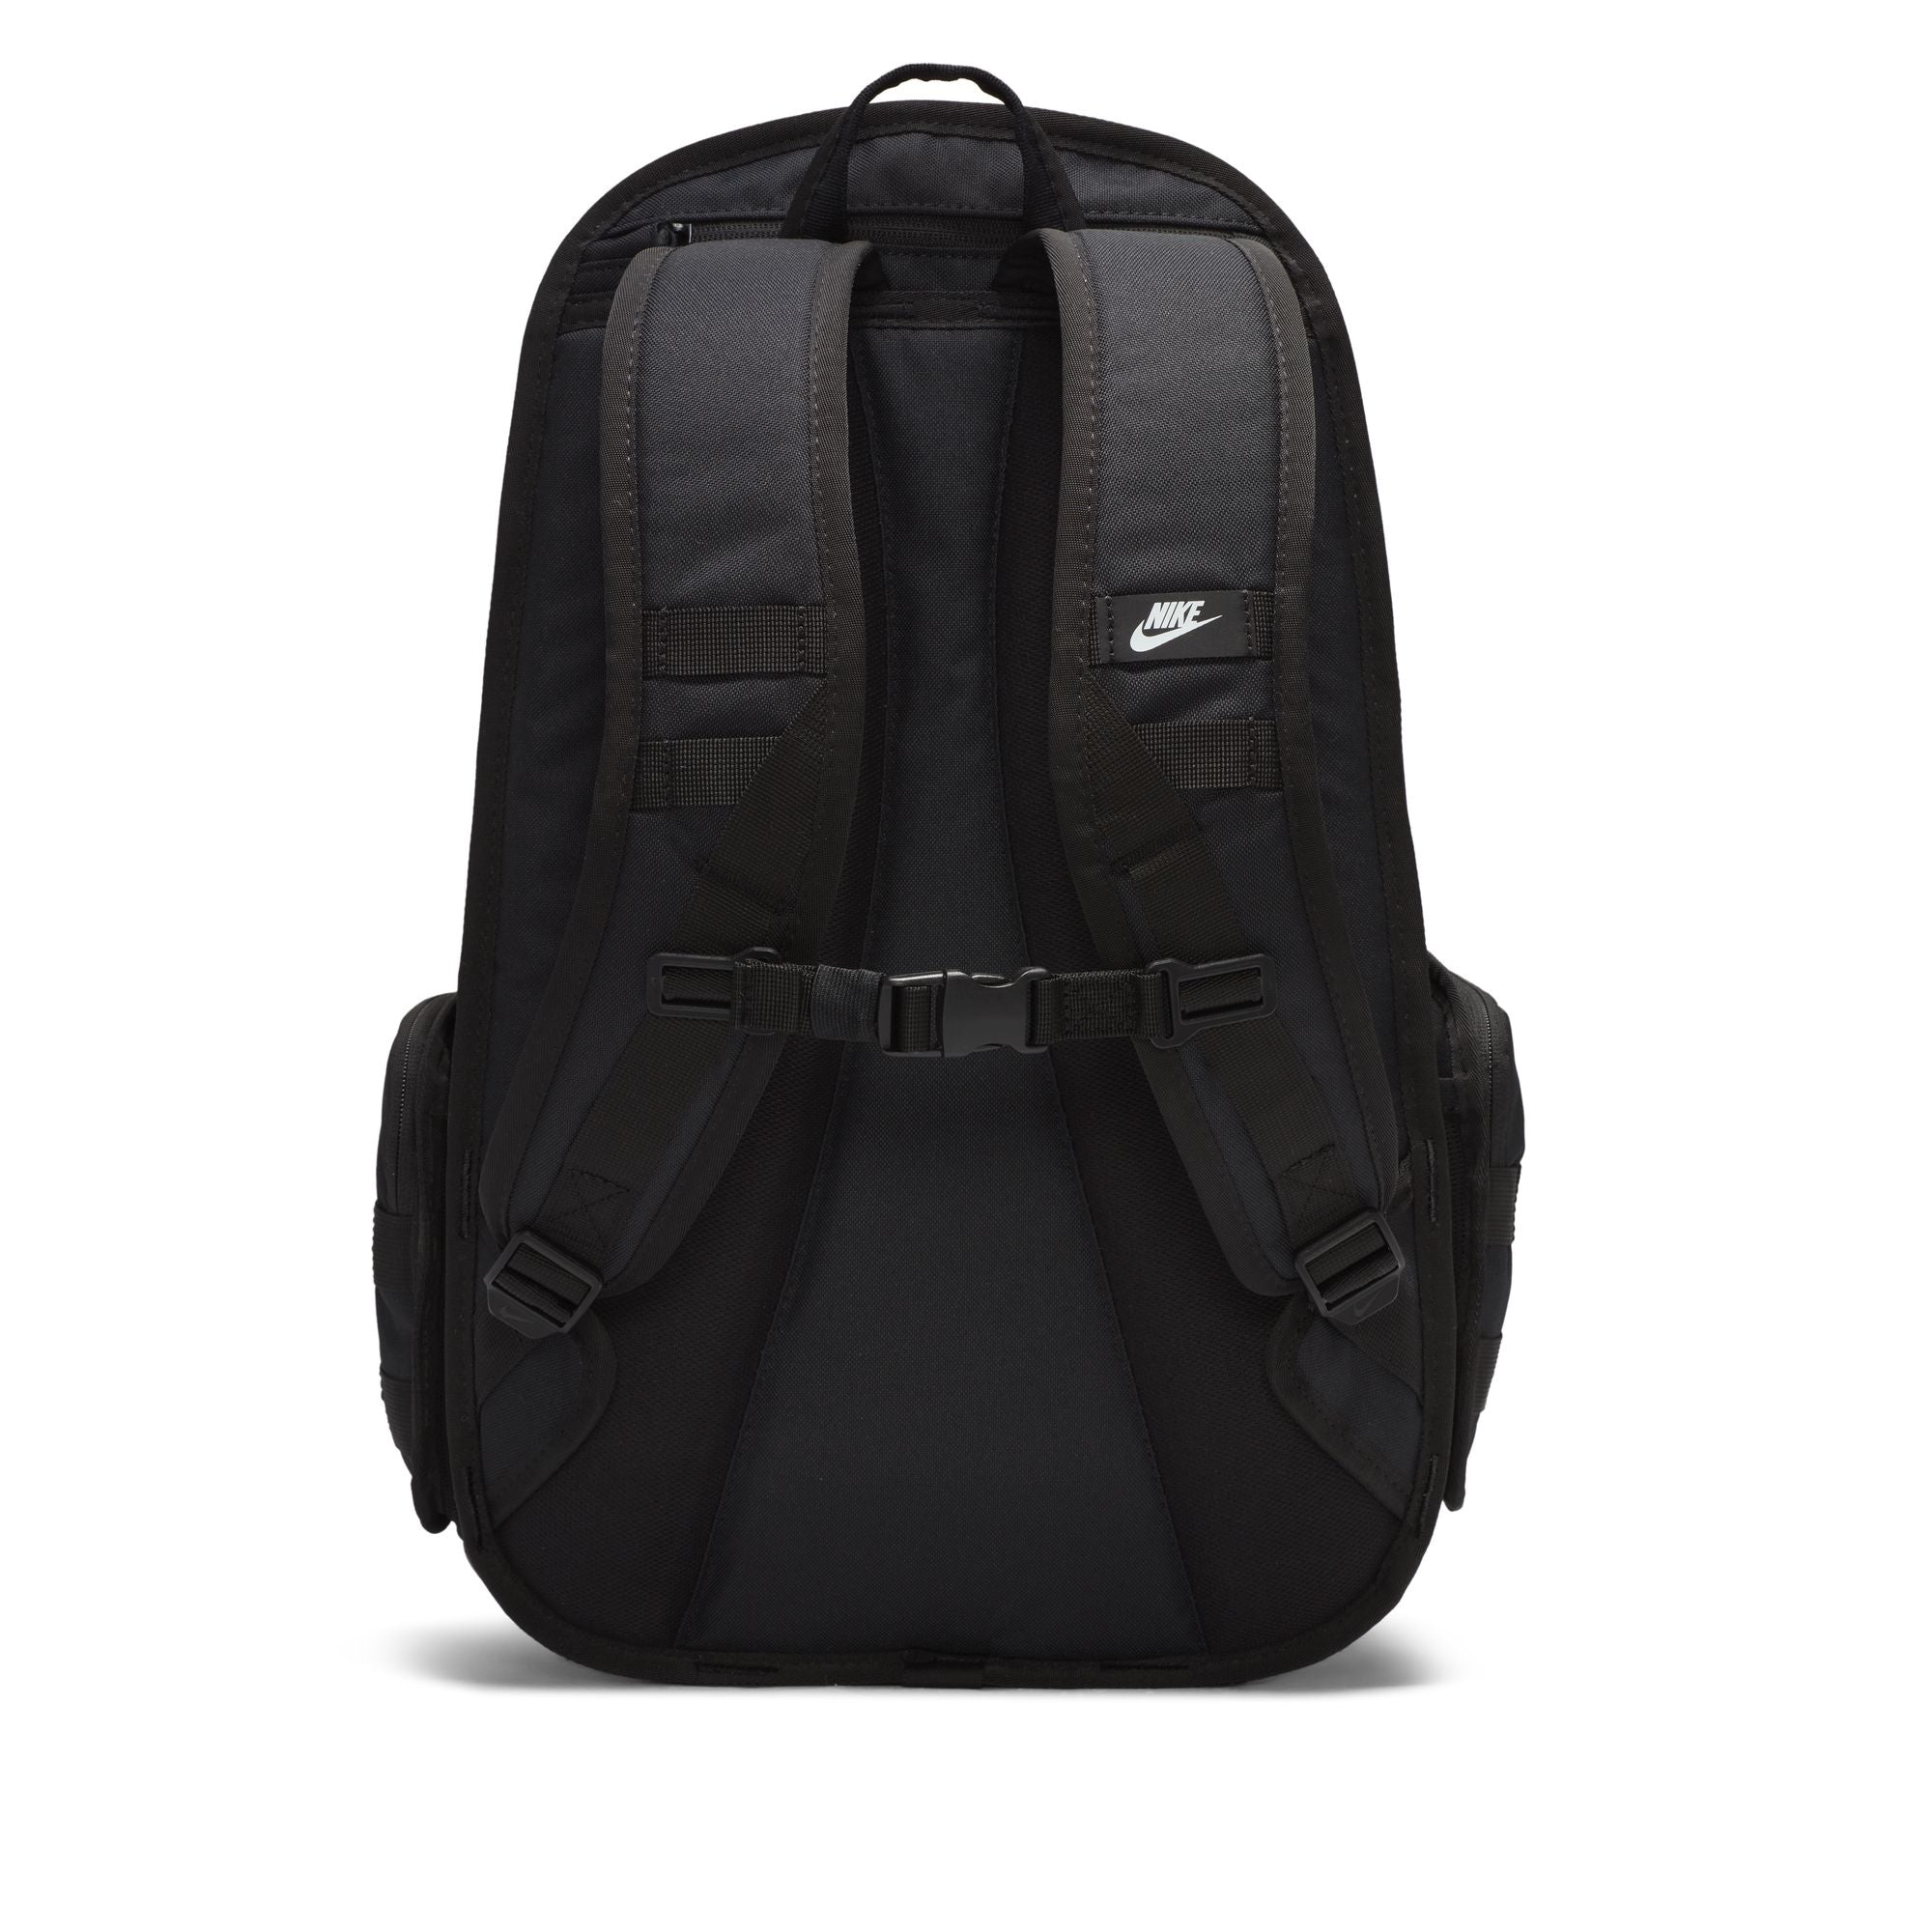 NSW Rpm Backpack (26L)